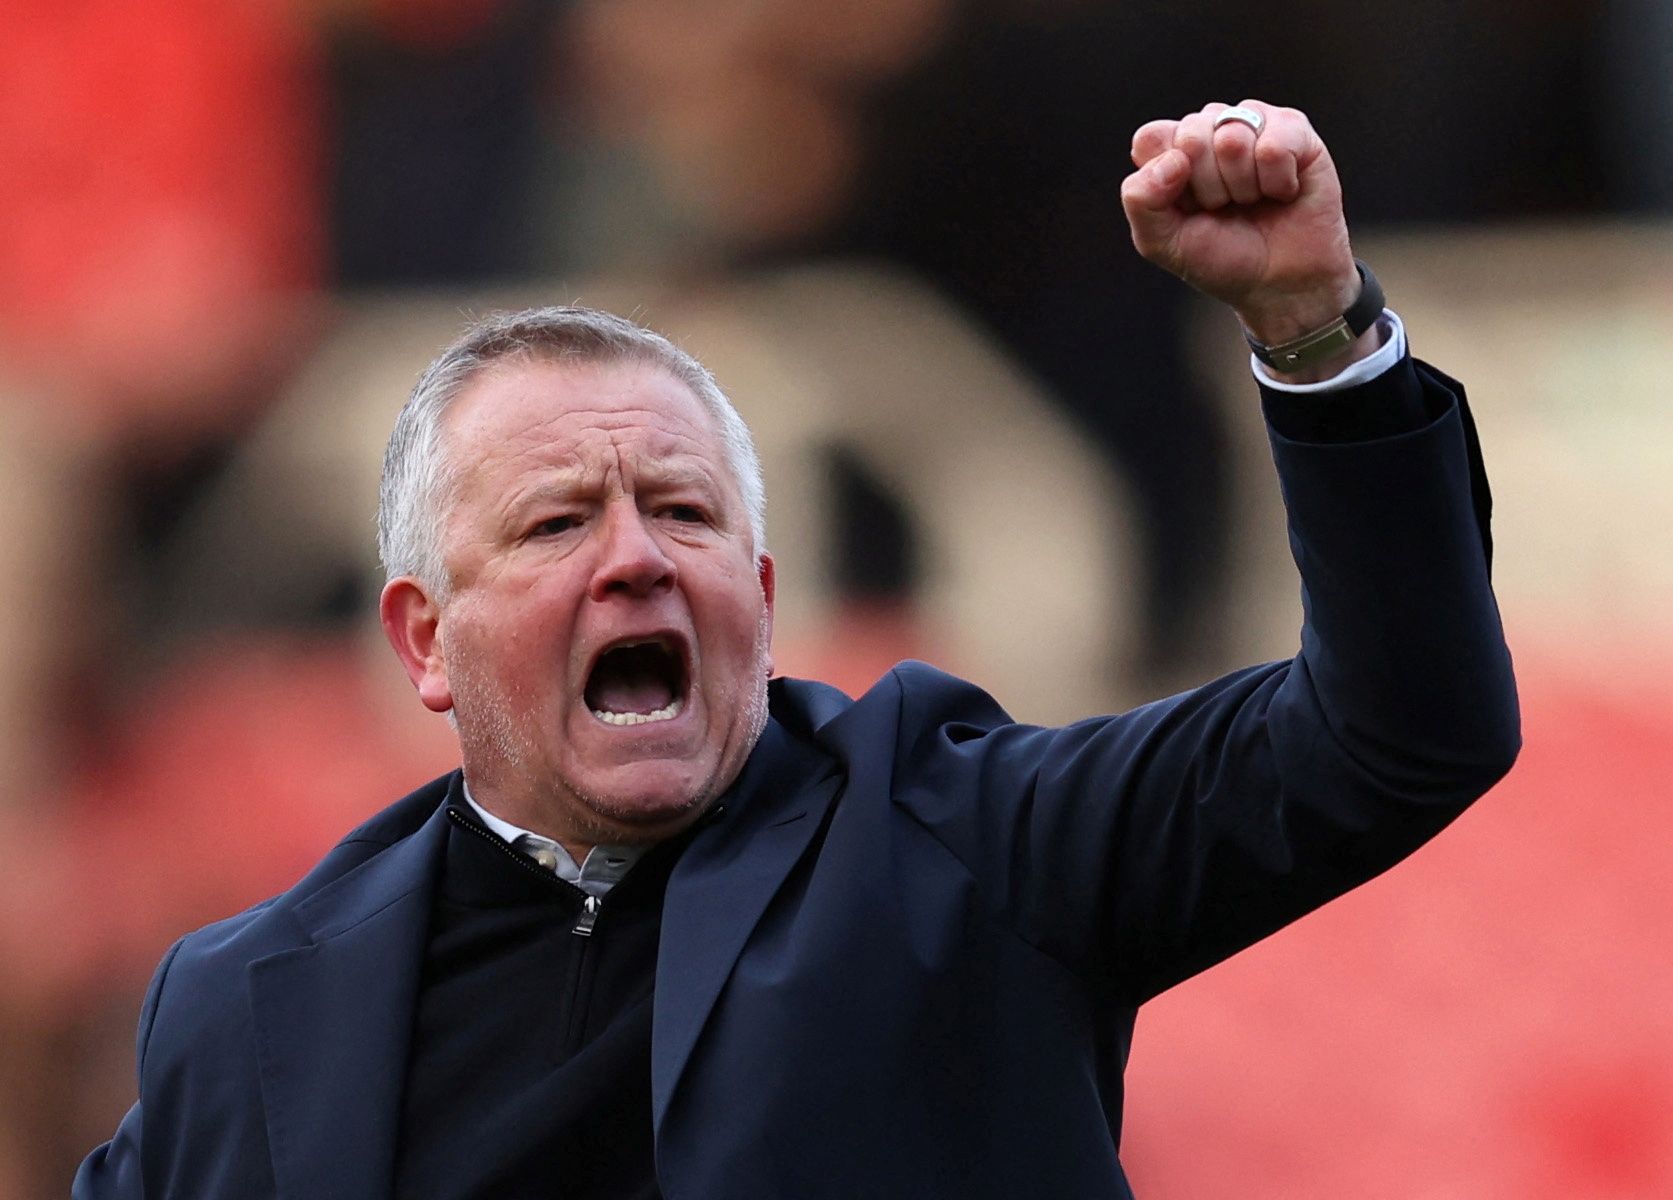 Soccer Football - Championship - Middlesbrough v Luton Town - Riverside Stadium, Middlesbrough, Britain - March 5, 2022  Middlesbrough manager Chris Wilder celebrates at the end of the match   Action Images/John Clifton  EDITORIAL USE ONLY. No use with unauthorized audio, video, data, fixture lists, club/league logos or 